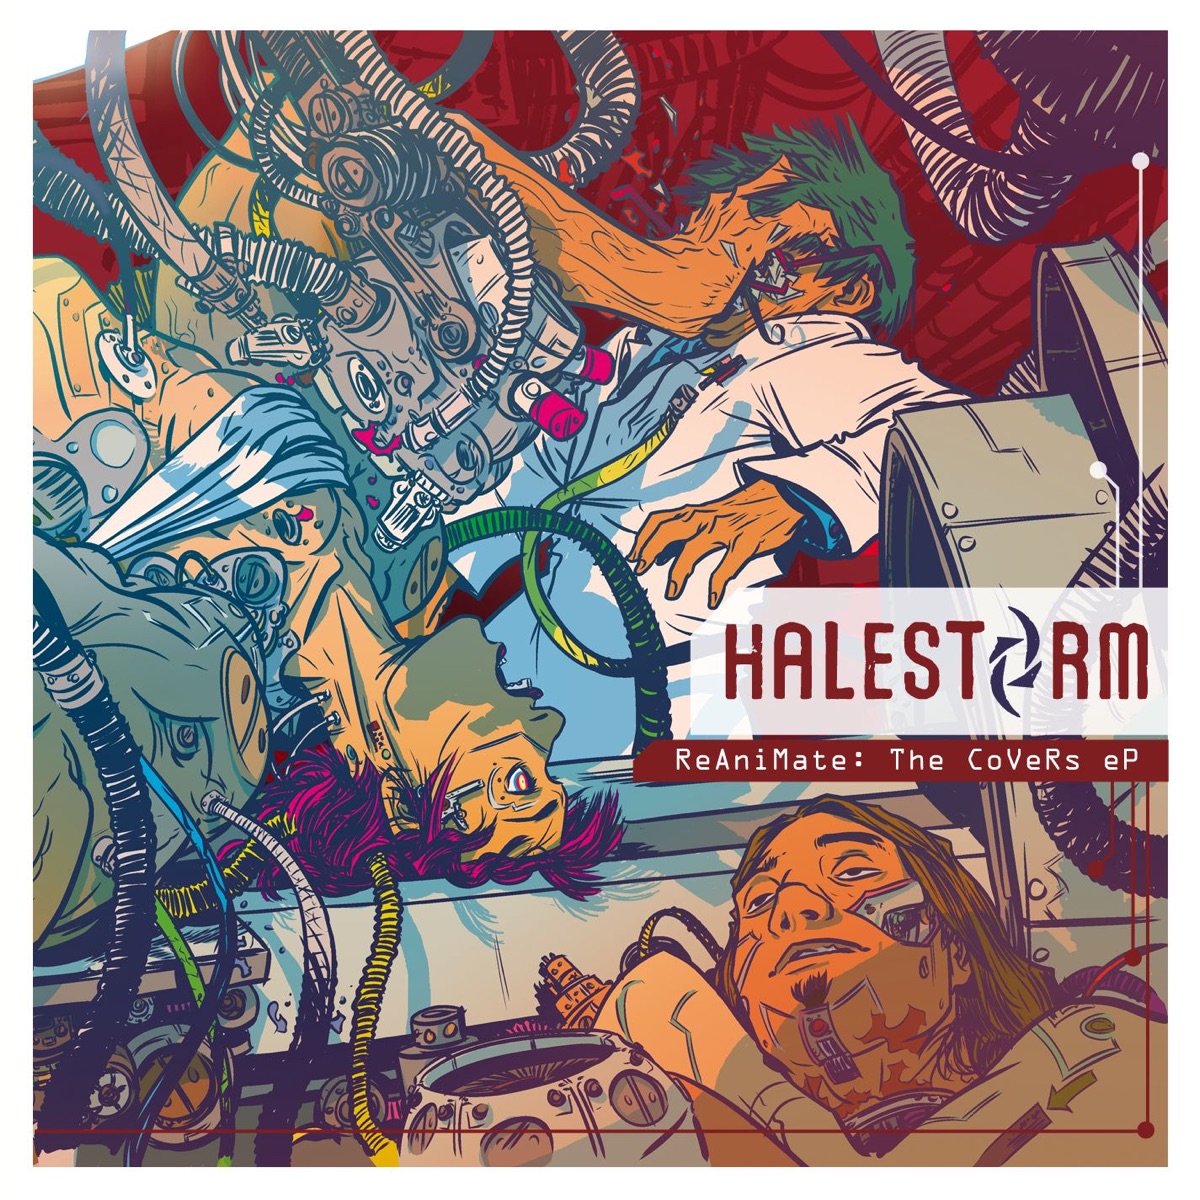 Into the Wild Live: Chicago - EP by Halestorm on Apple Music